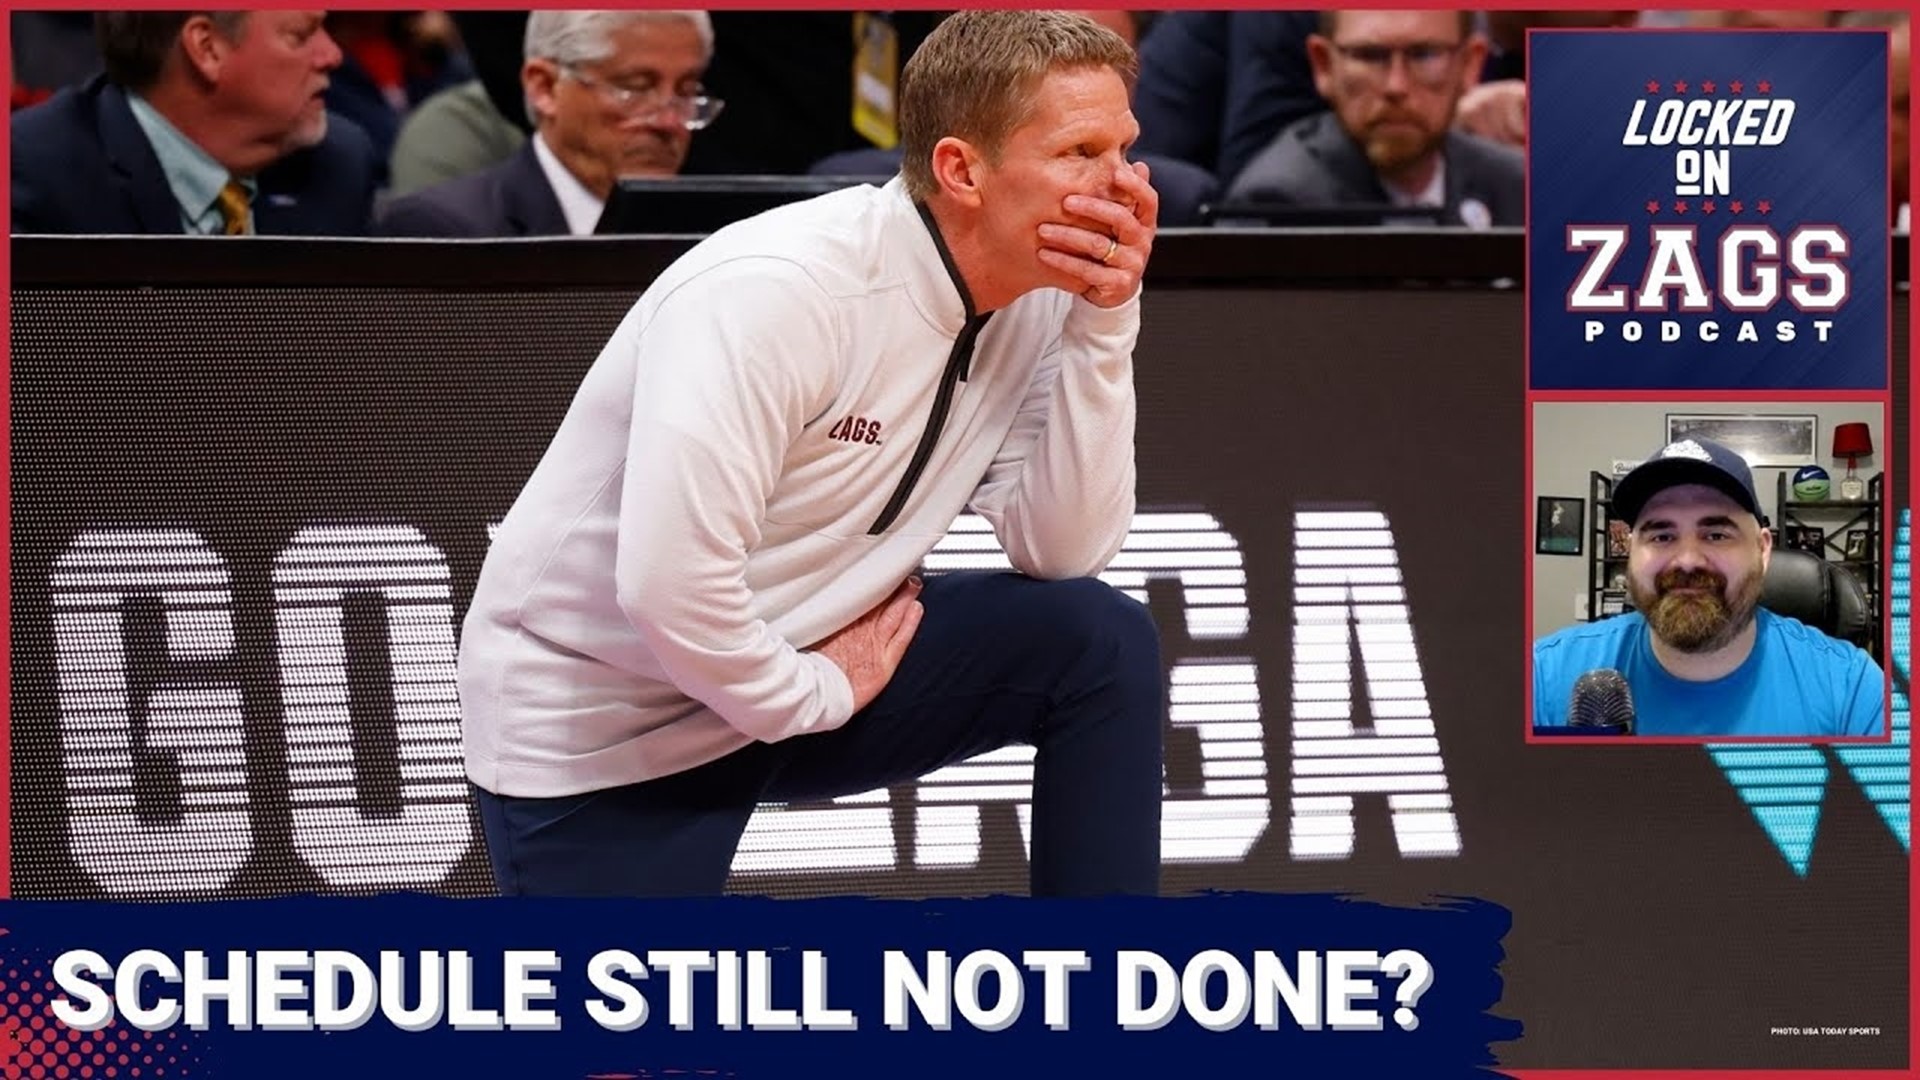 Mark Few and the Gonzaga Bulldogs have scheduled 12 non-conference games.